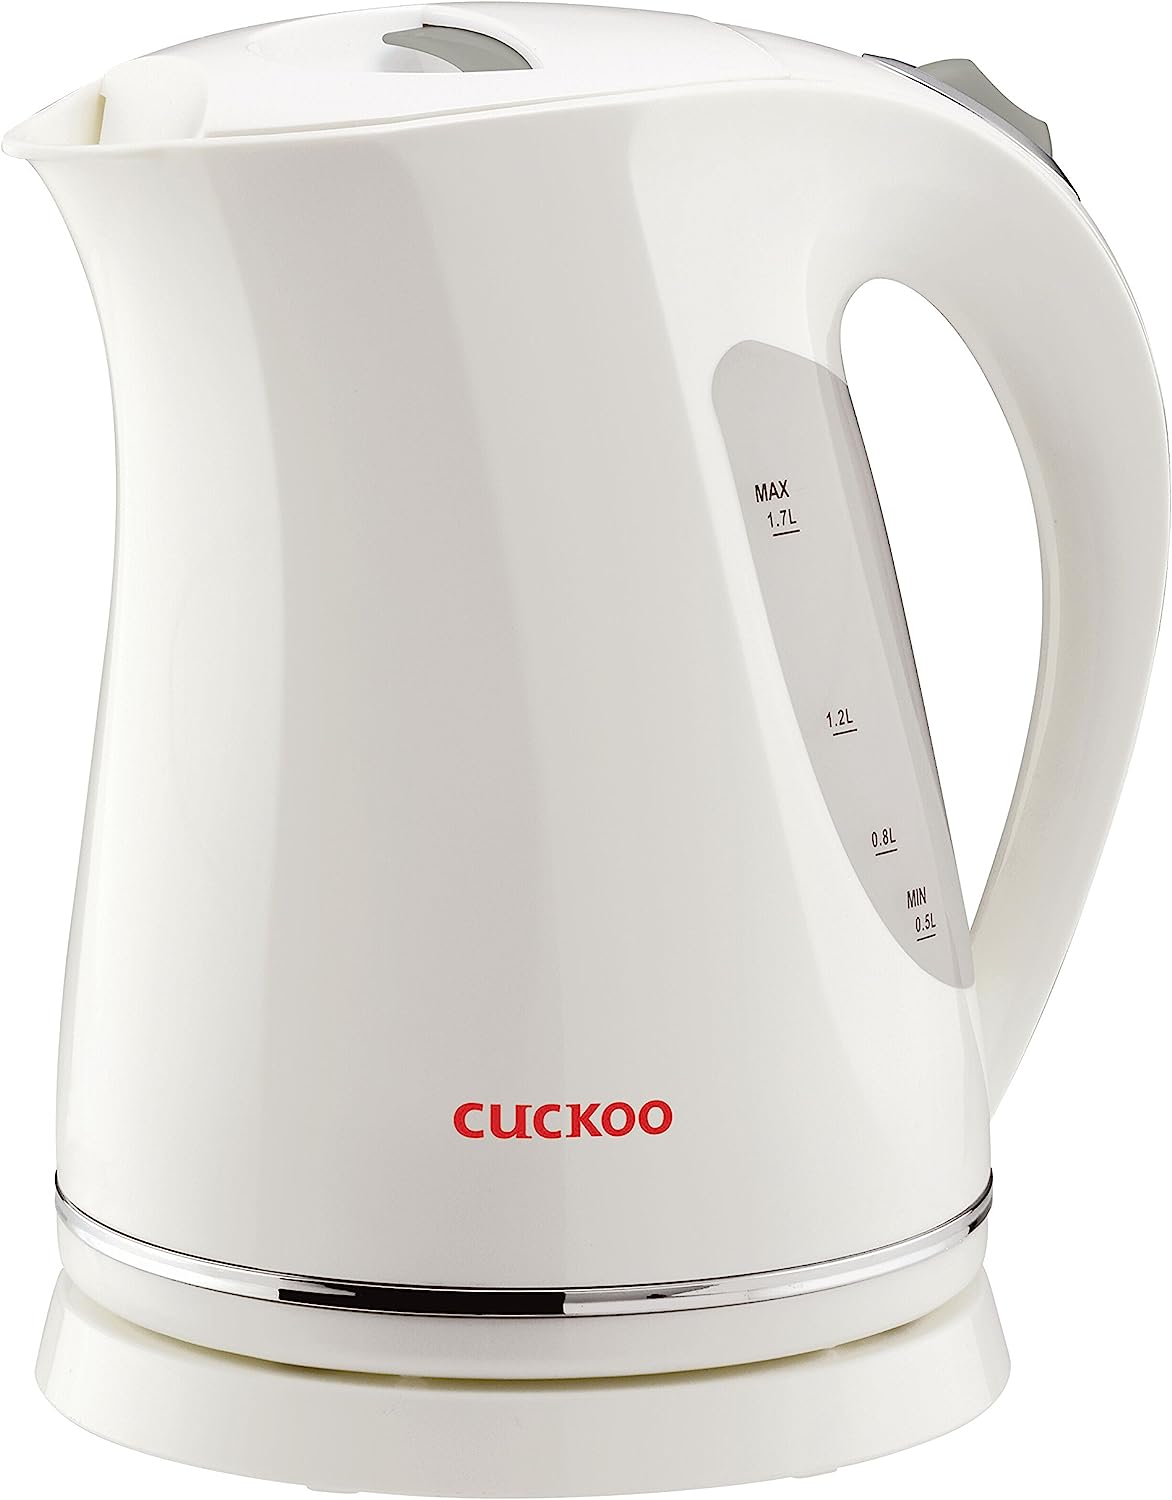 Cuckoo 1.7L Electric Water Kettle